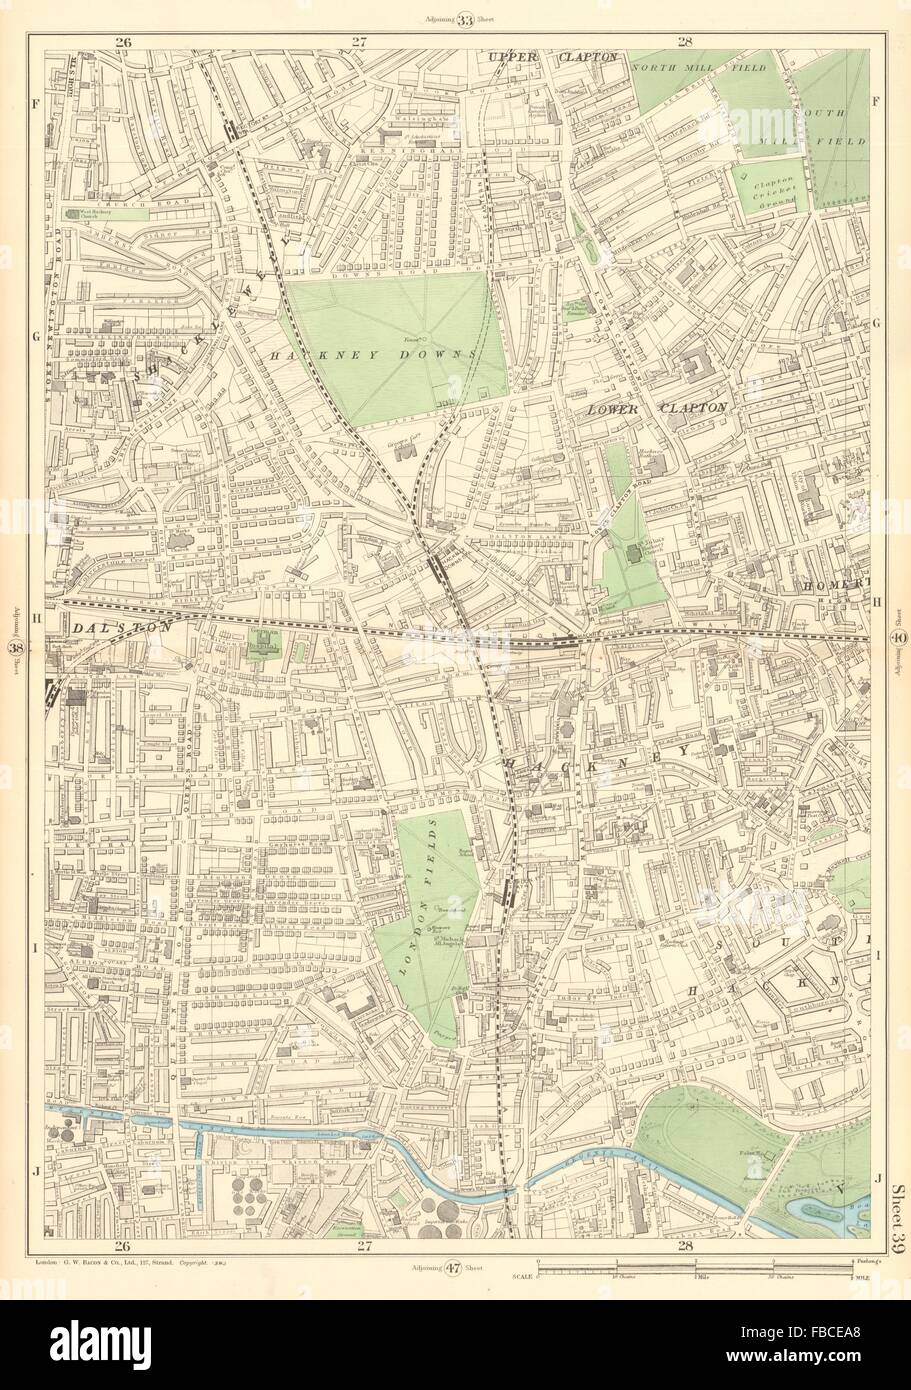 HACKNEY Lower Clapton Dalston Shacklewell London Fields Homerton, 1903 old map Stock Photo